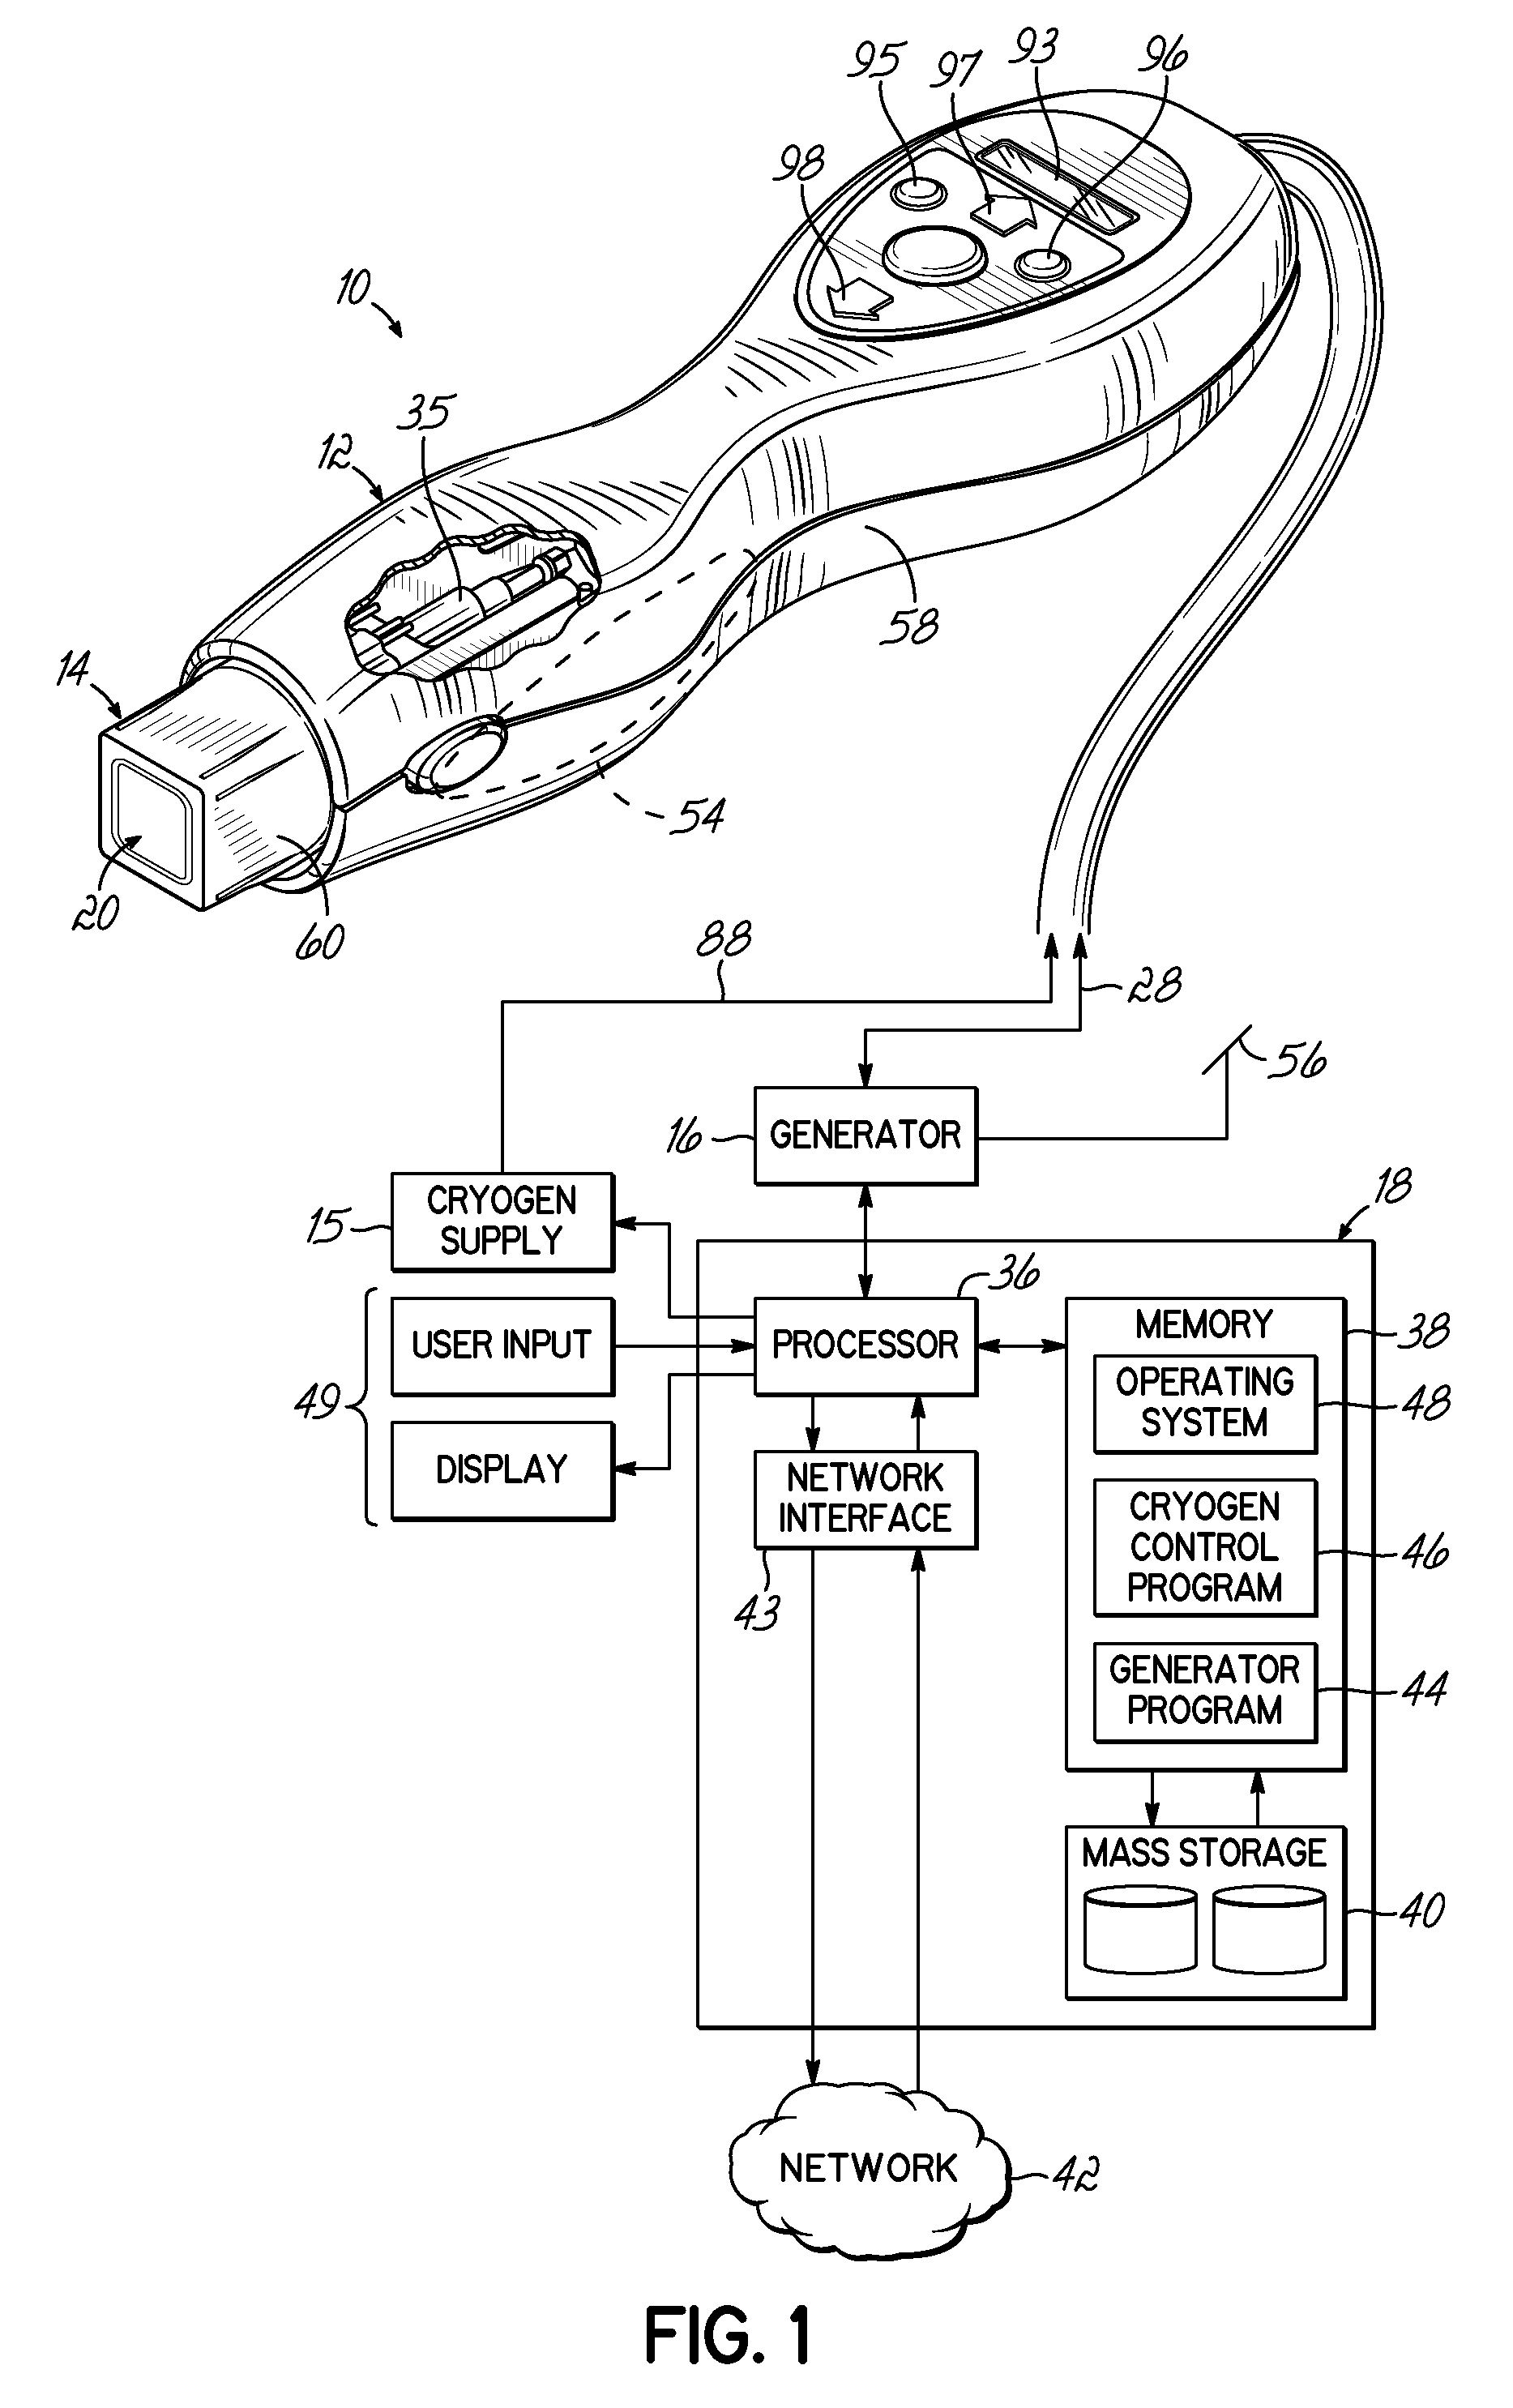 Patterned electrodes for tissue treatment systems